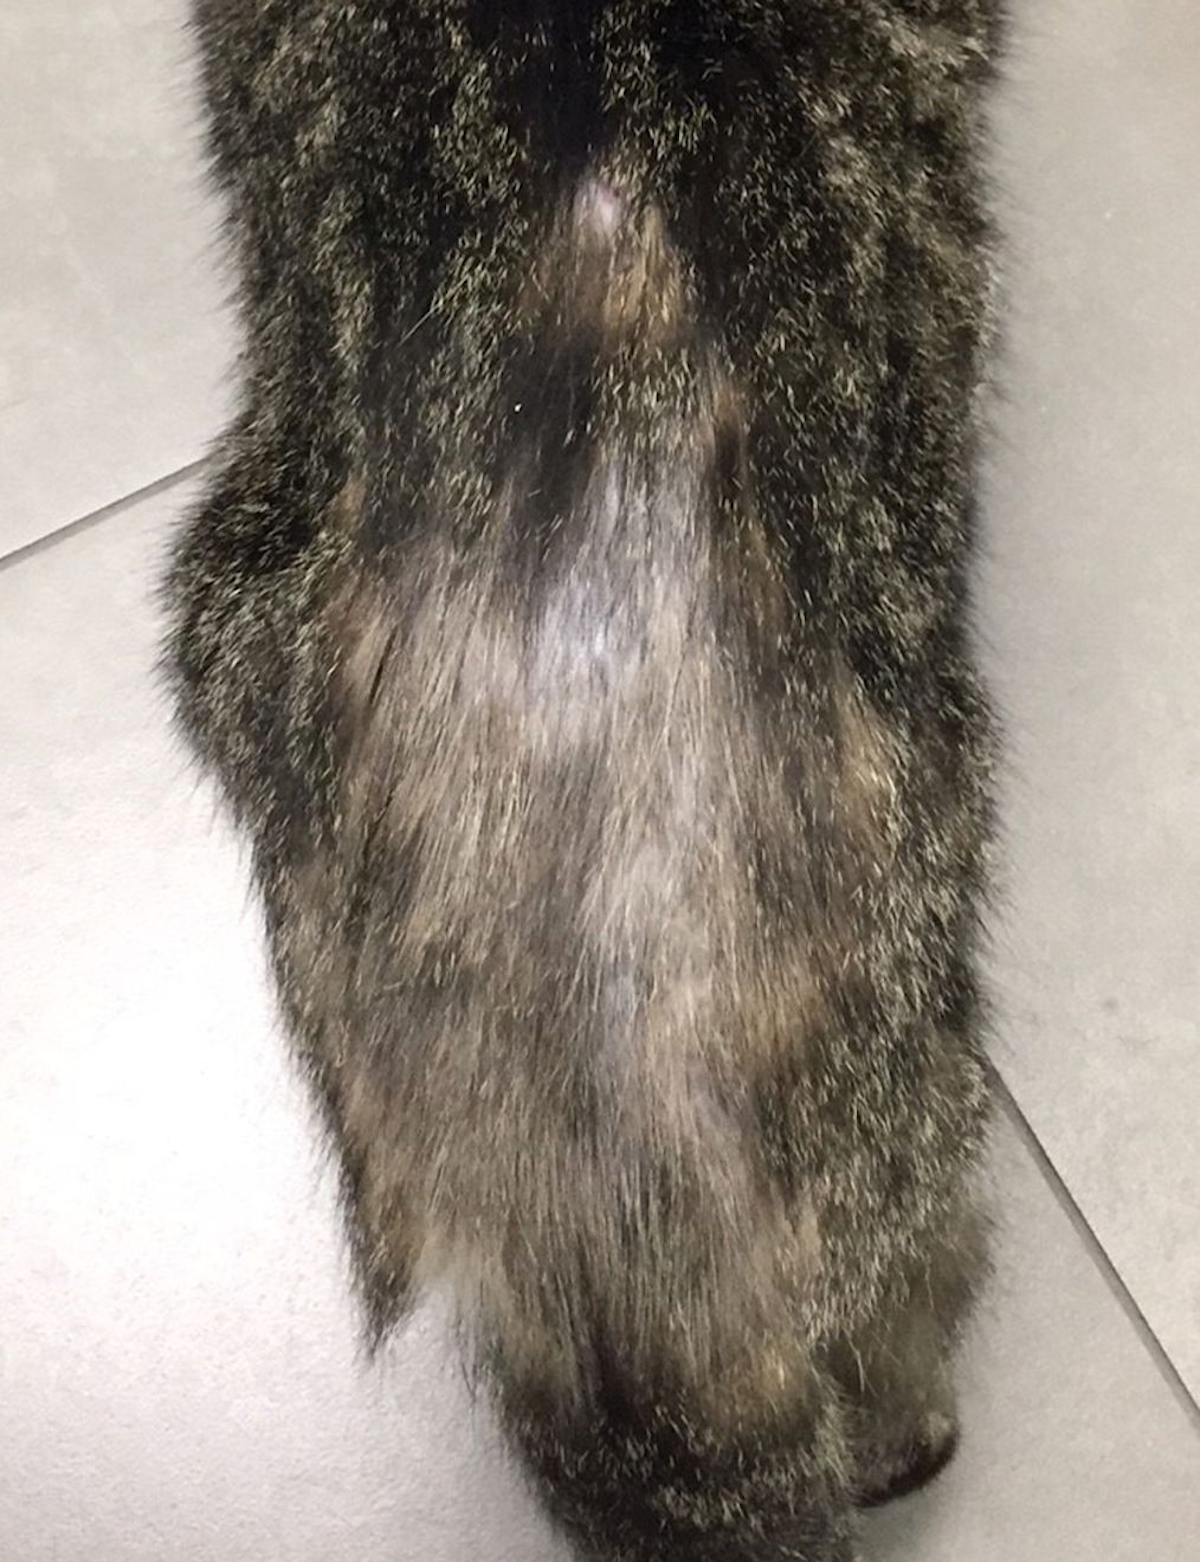 A cat with barbered hair, patchy alopecia and miliary dermatitis along the dorsal lumbar region.